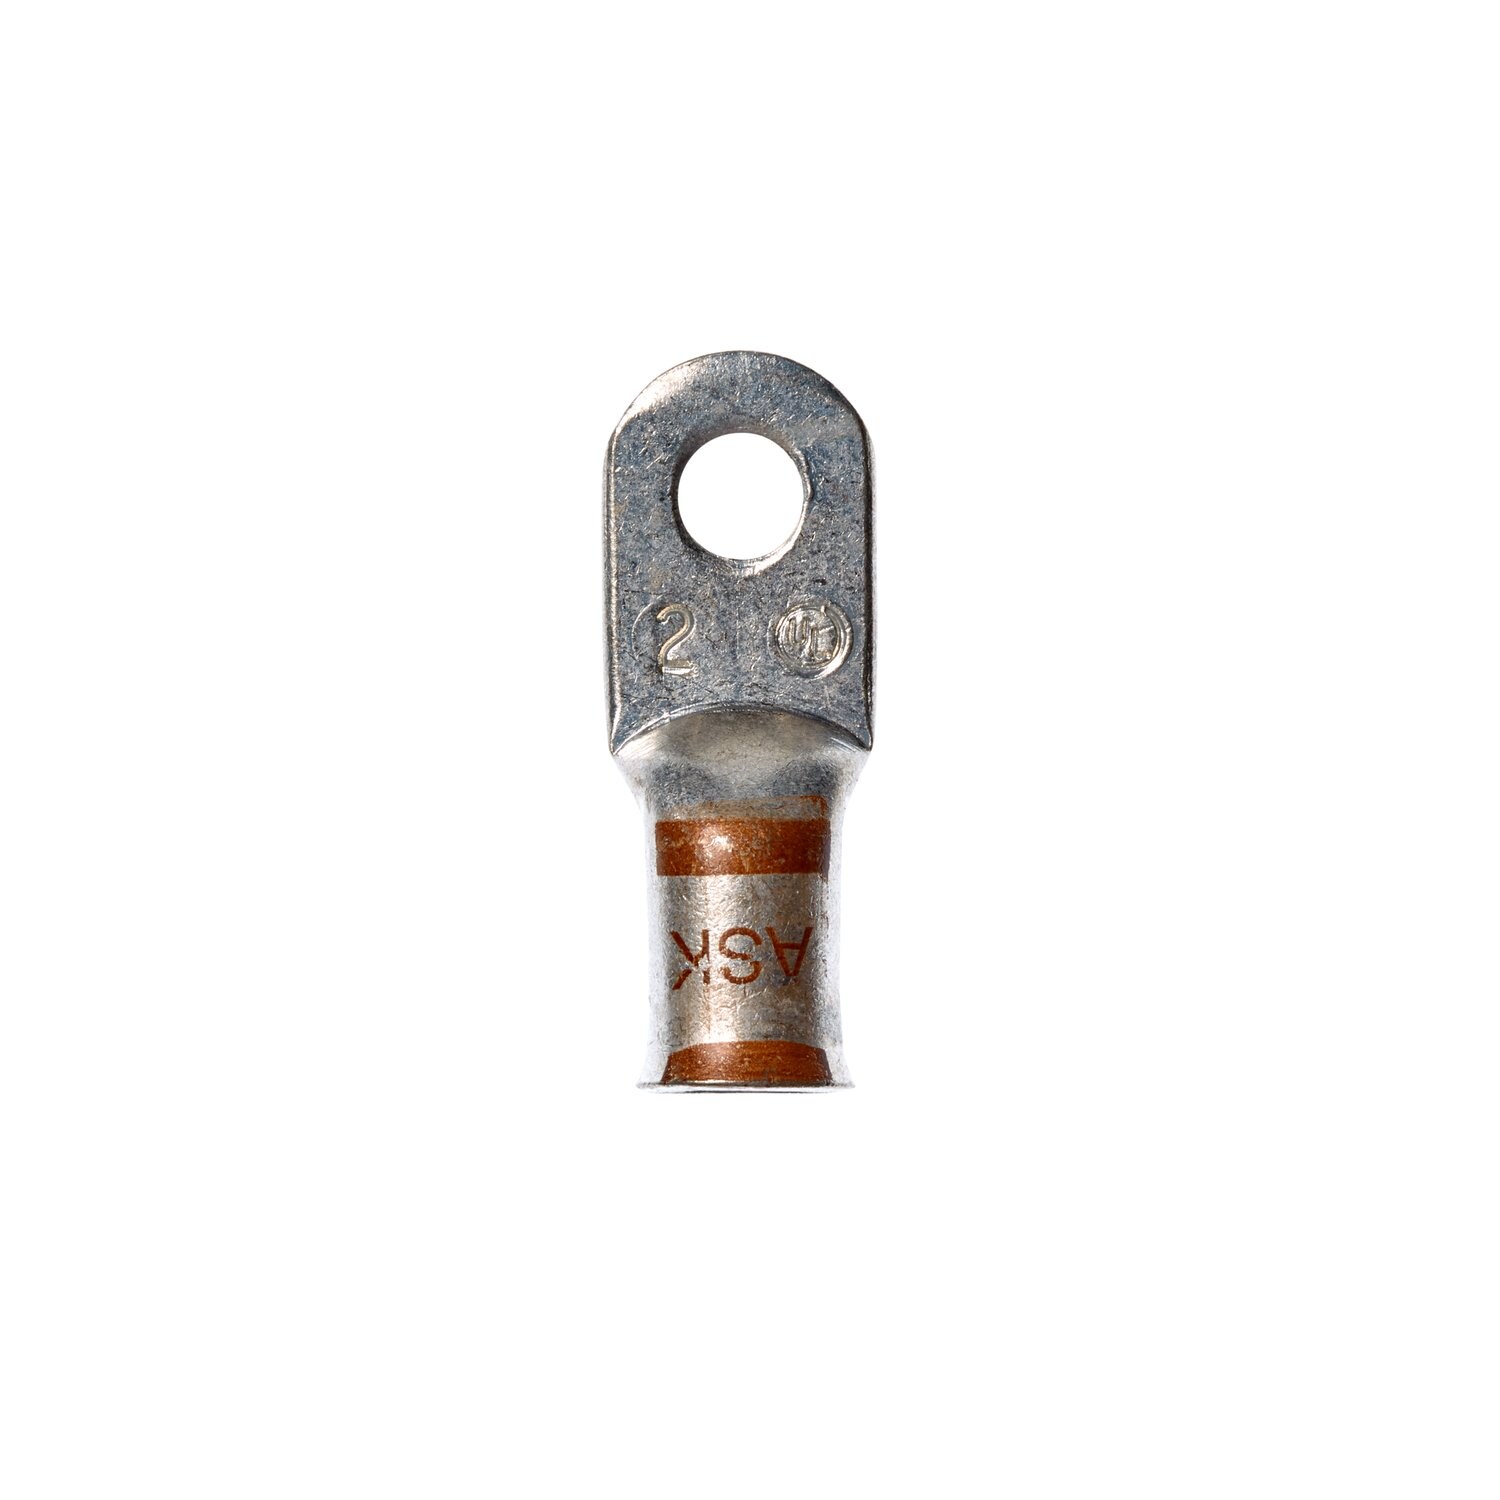 7100011443 - 3M Scotchlok Large Gauge Ring Tongue, Copper Non-Insulated Seamless
MC2-38RX, Stud Size 3/8, 100/Case